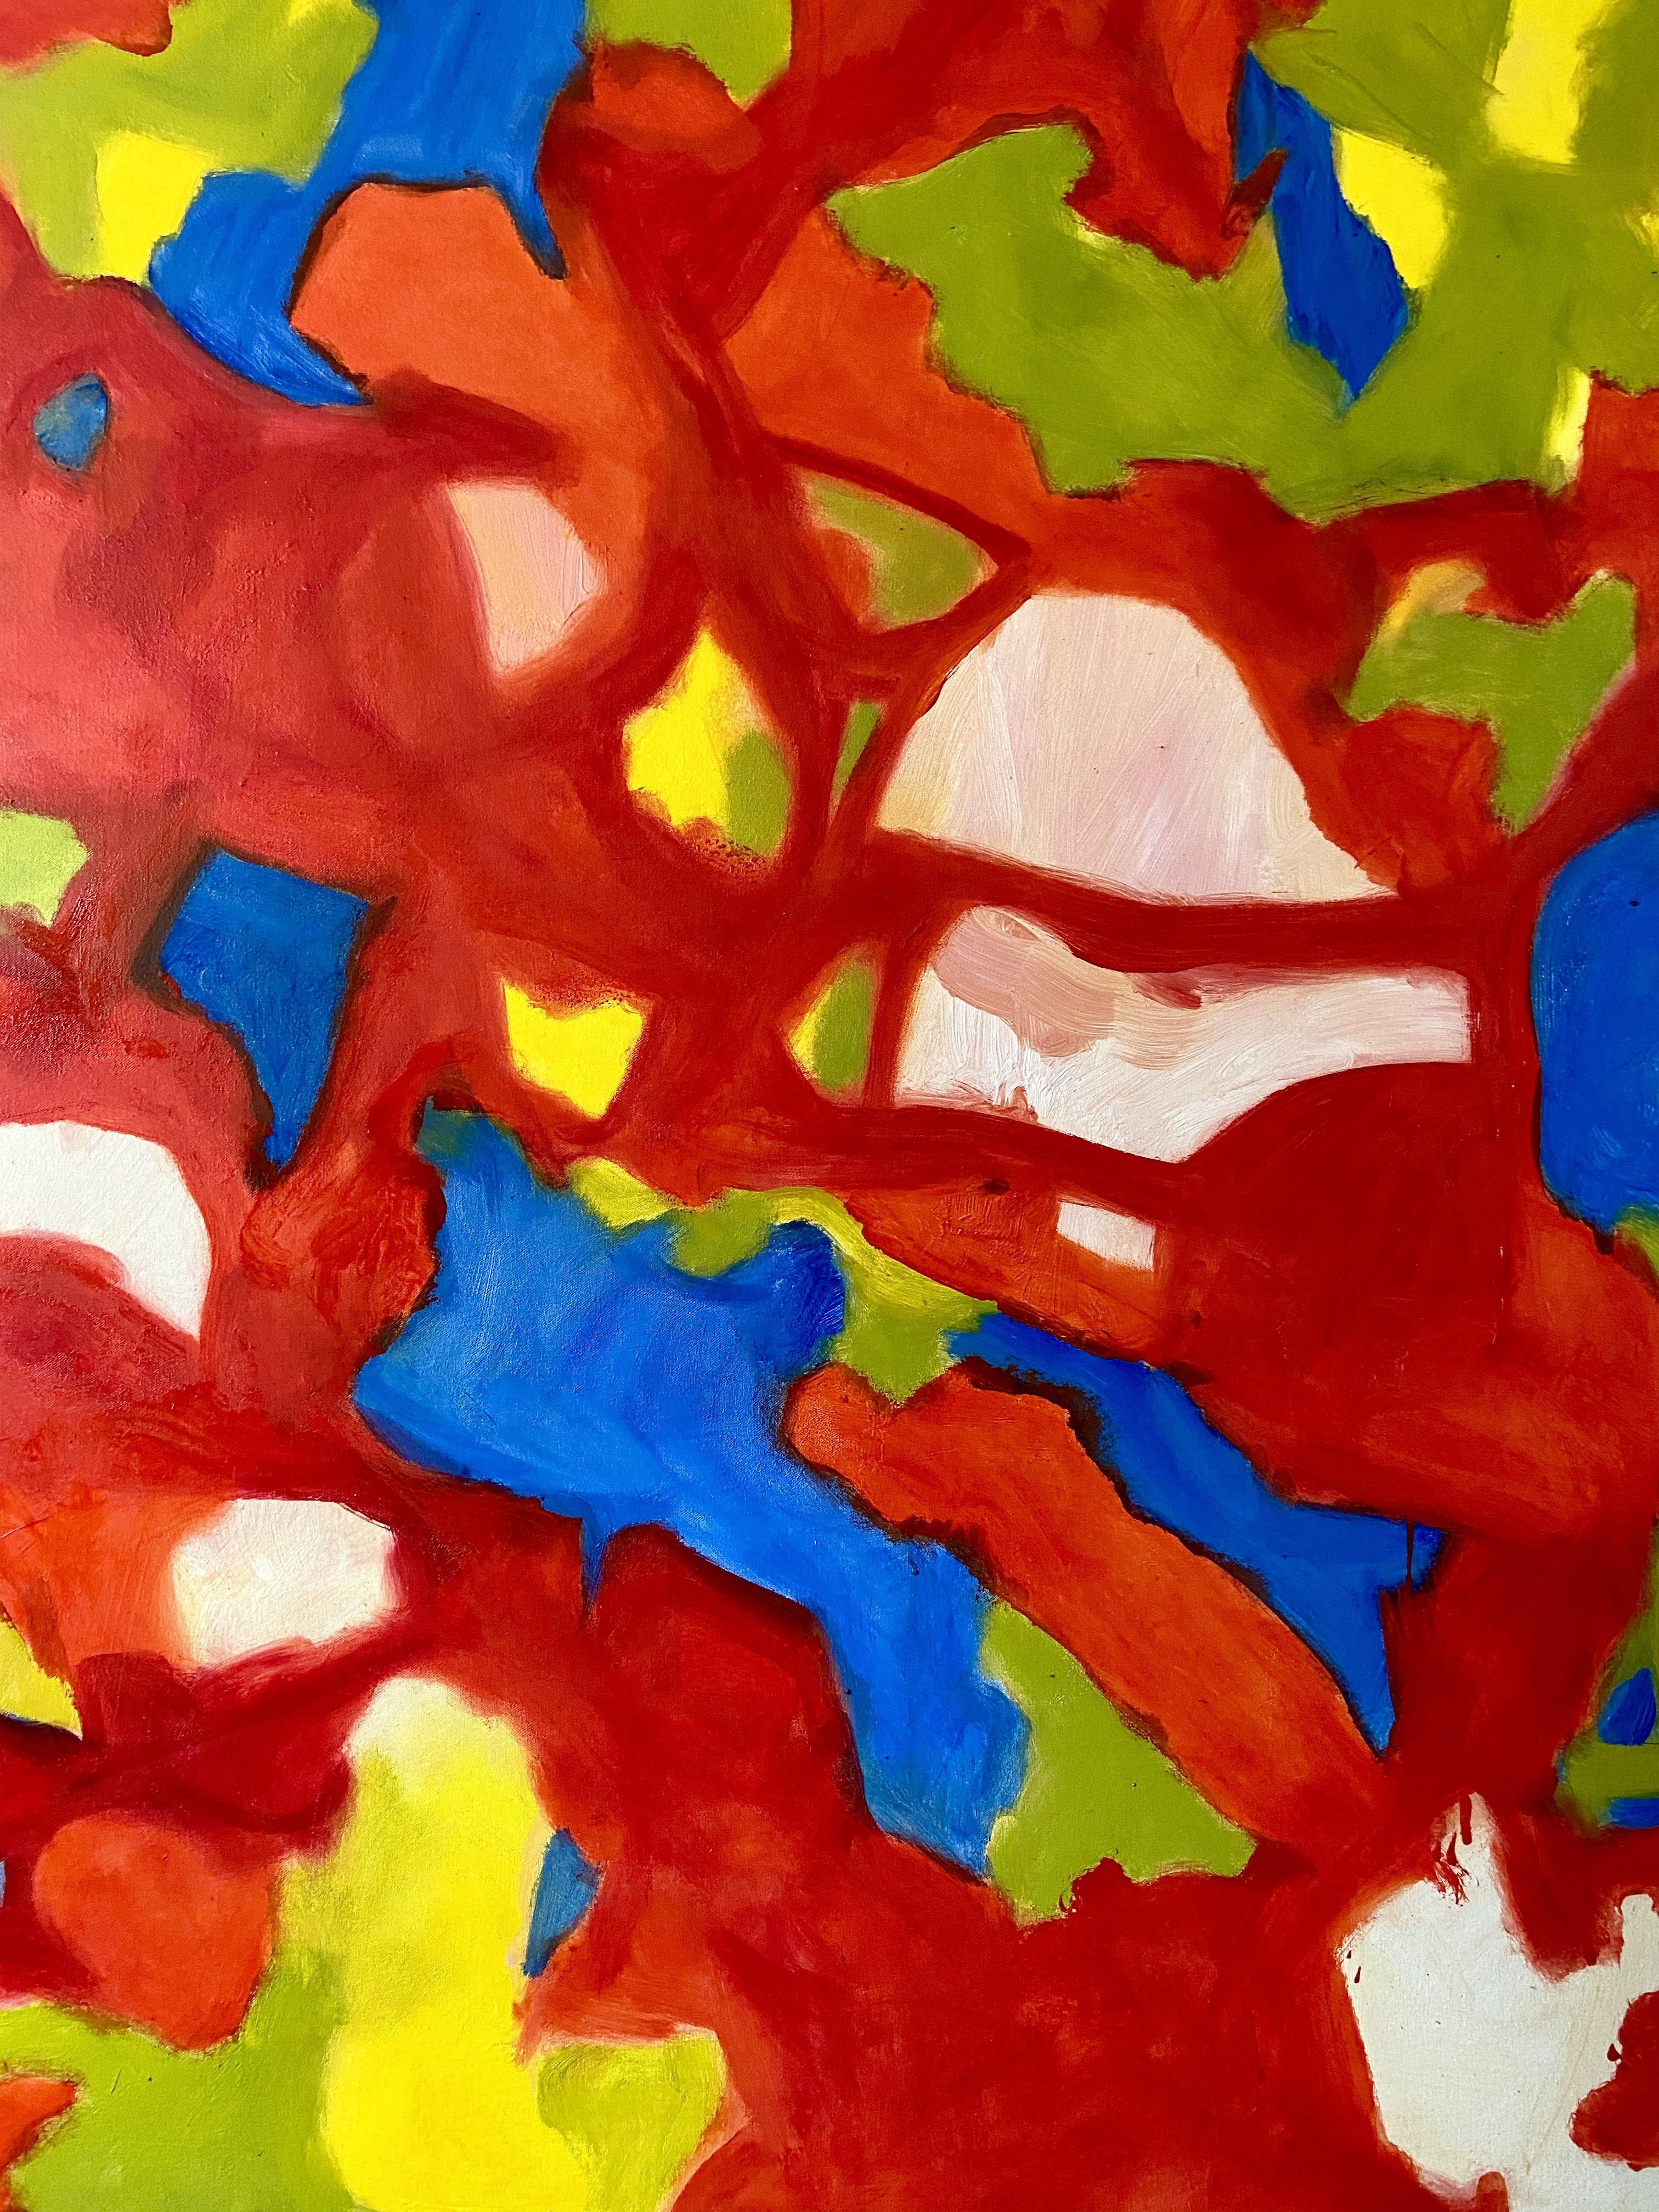 My abstract paintings are all about creating excitement for the viewer through concentrated exploration. Each painting is inspired by nature, travels, or imagination and created to embody immediate impact and lasting power. It is about creating a